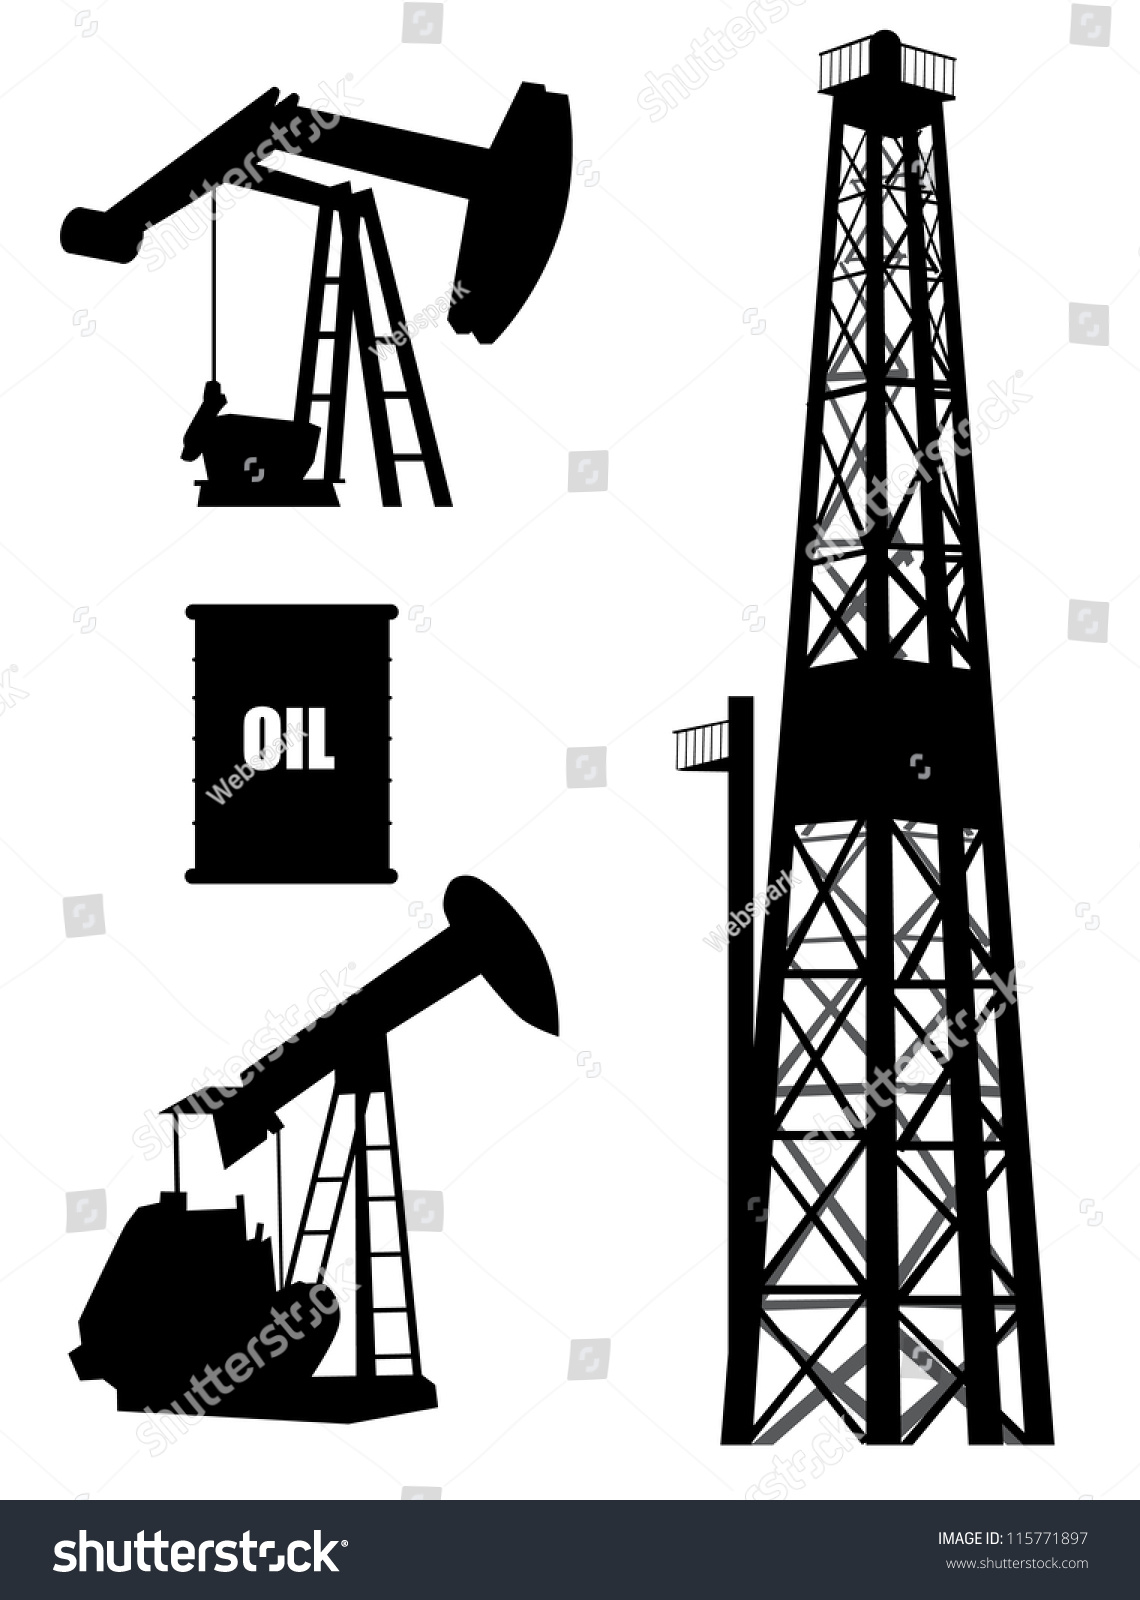 clipart oil well - photo #44